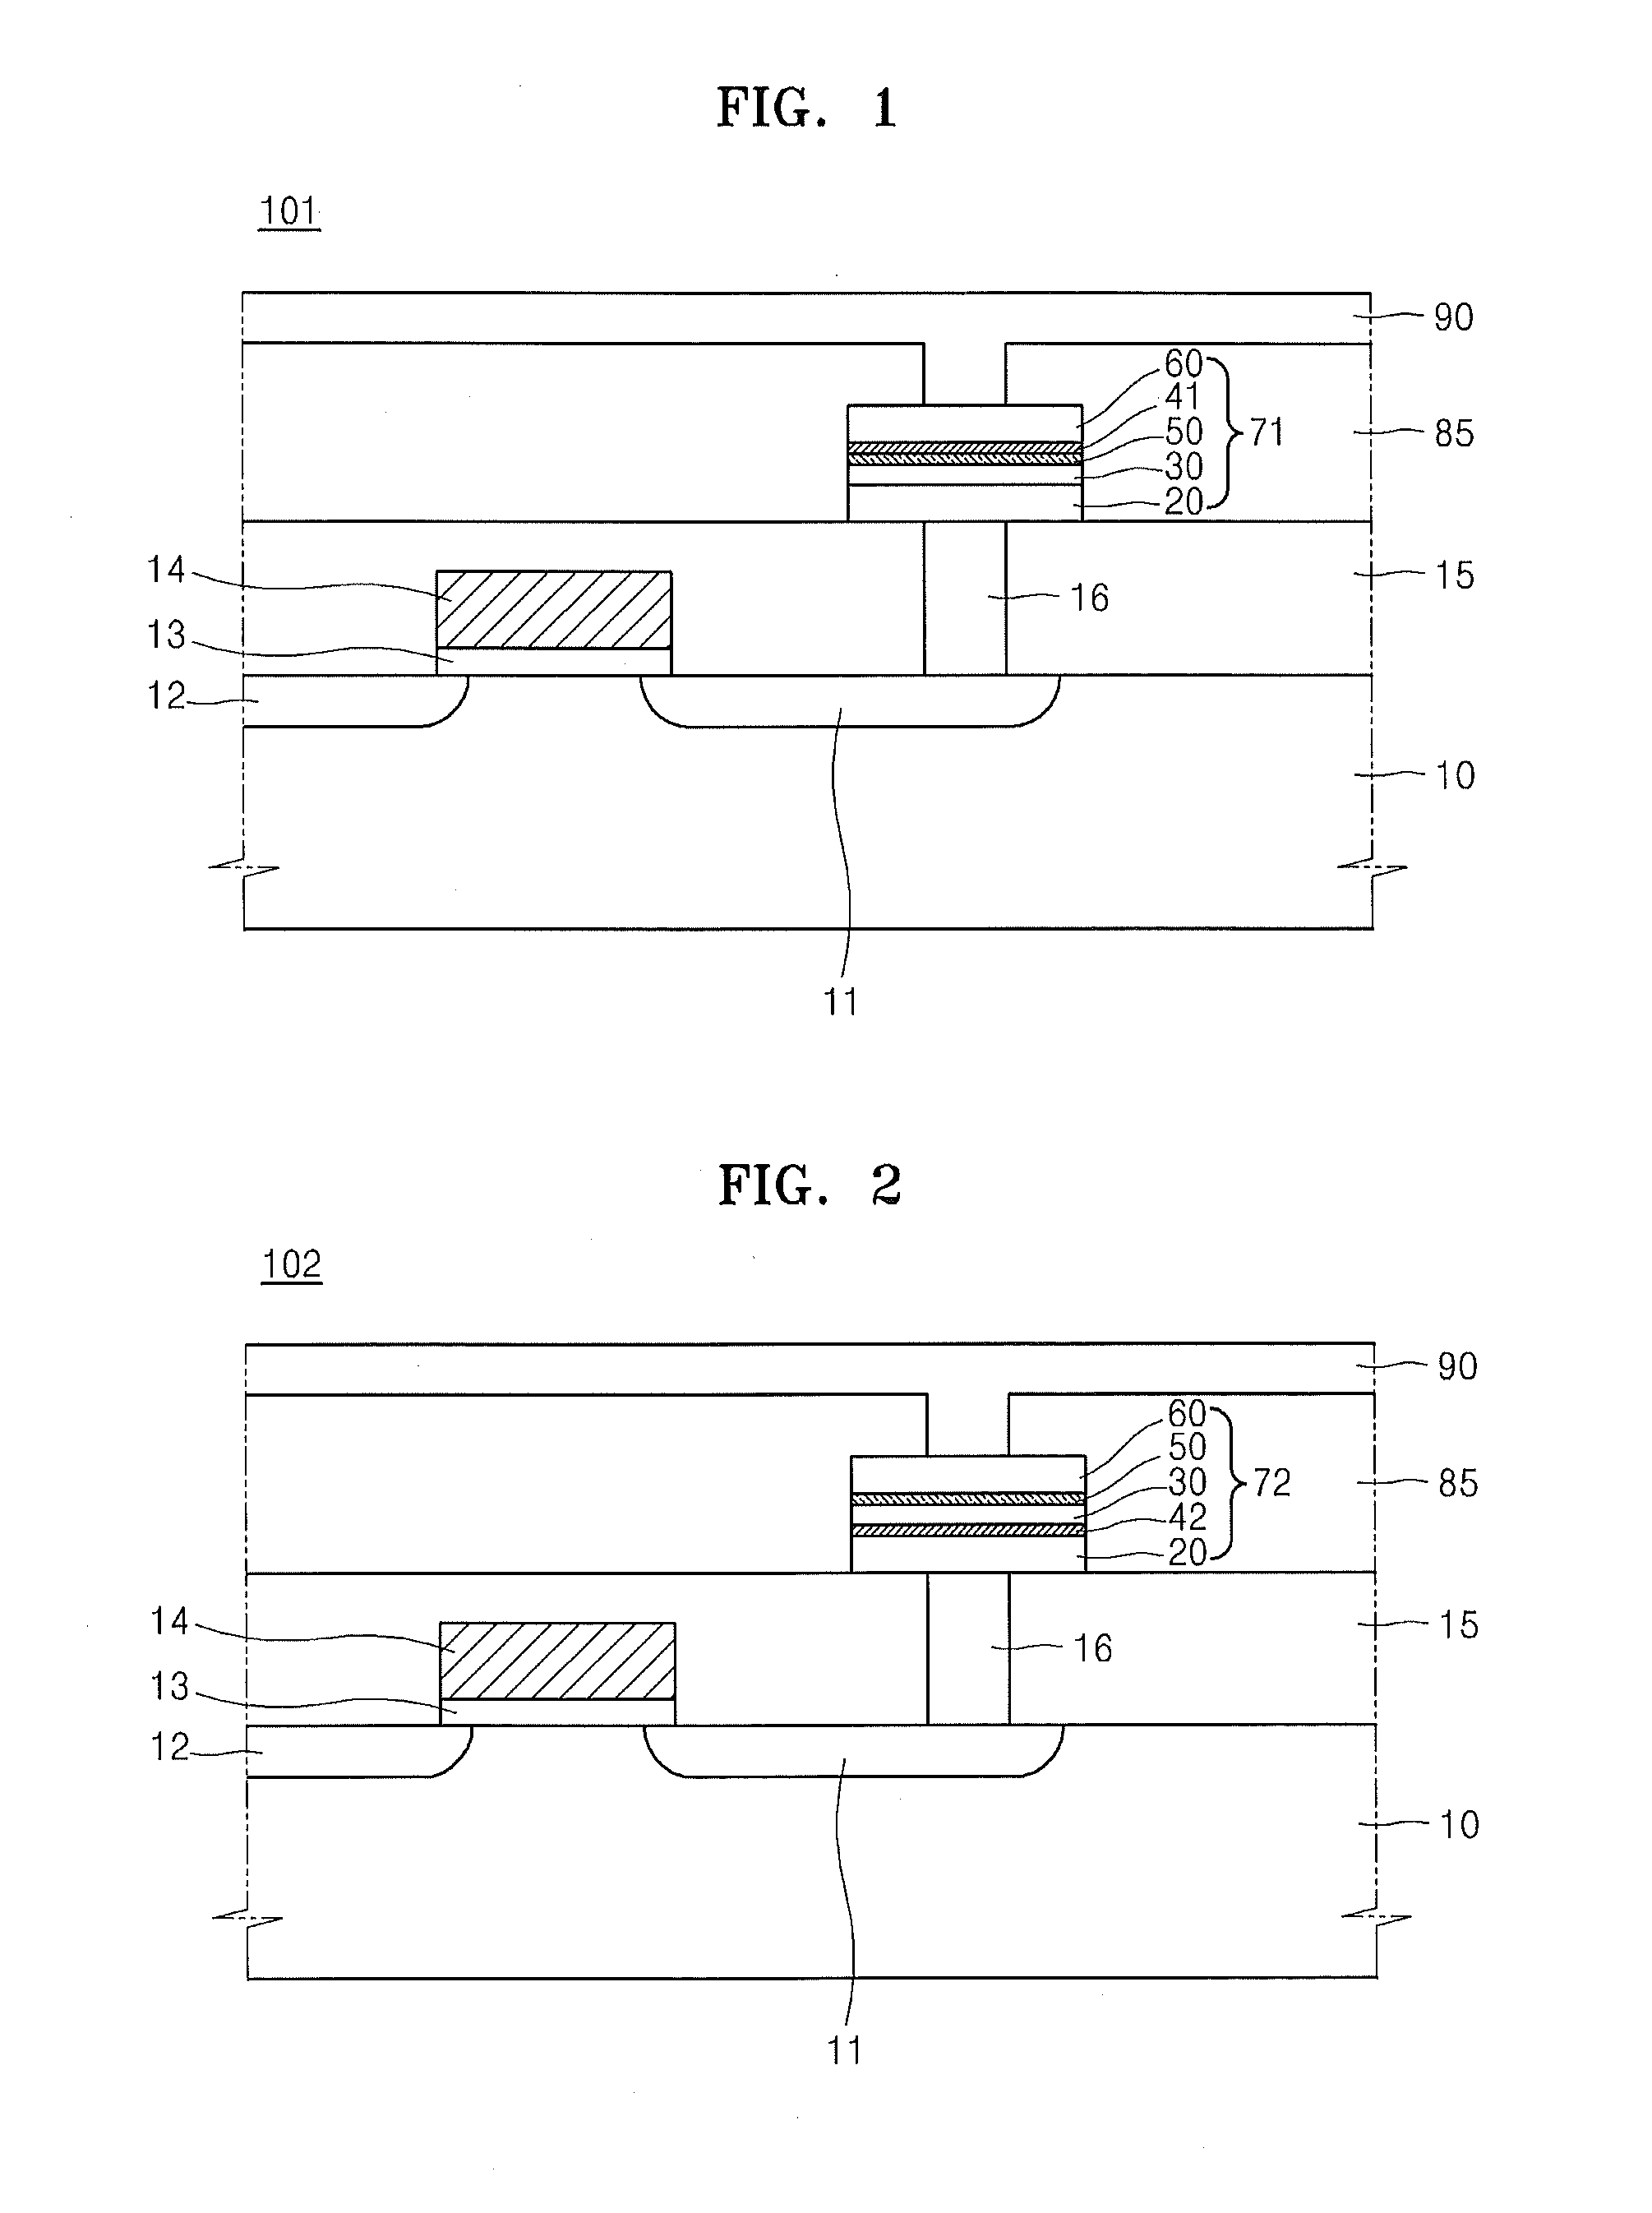 Nonvolatile Memory Devices Having Cells with Oxygen Diffusion Barrier Layers Therein and Methods of Manufacturing the Same